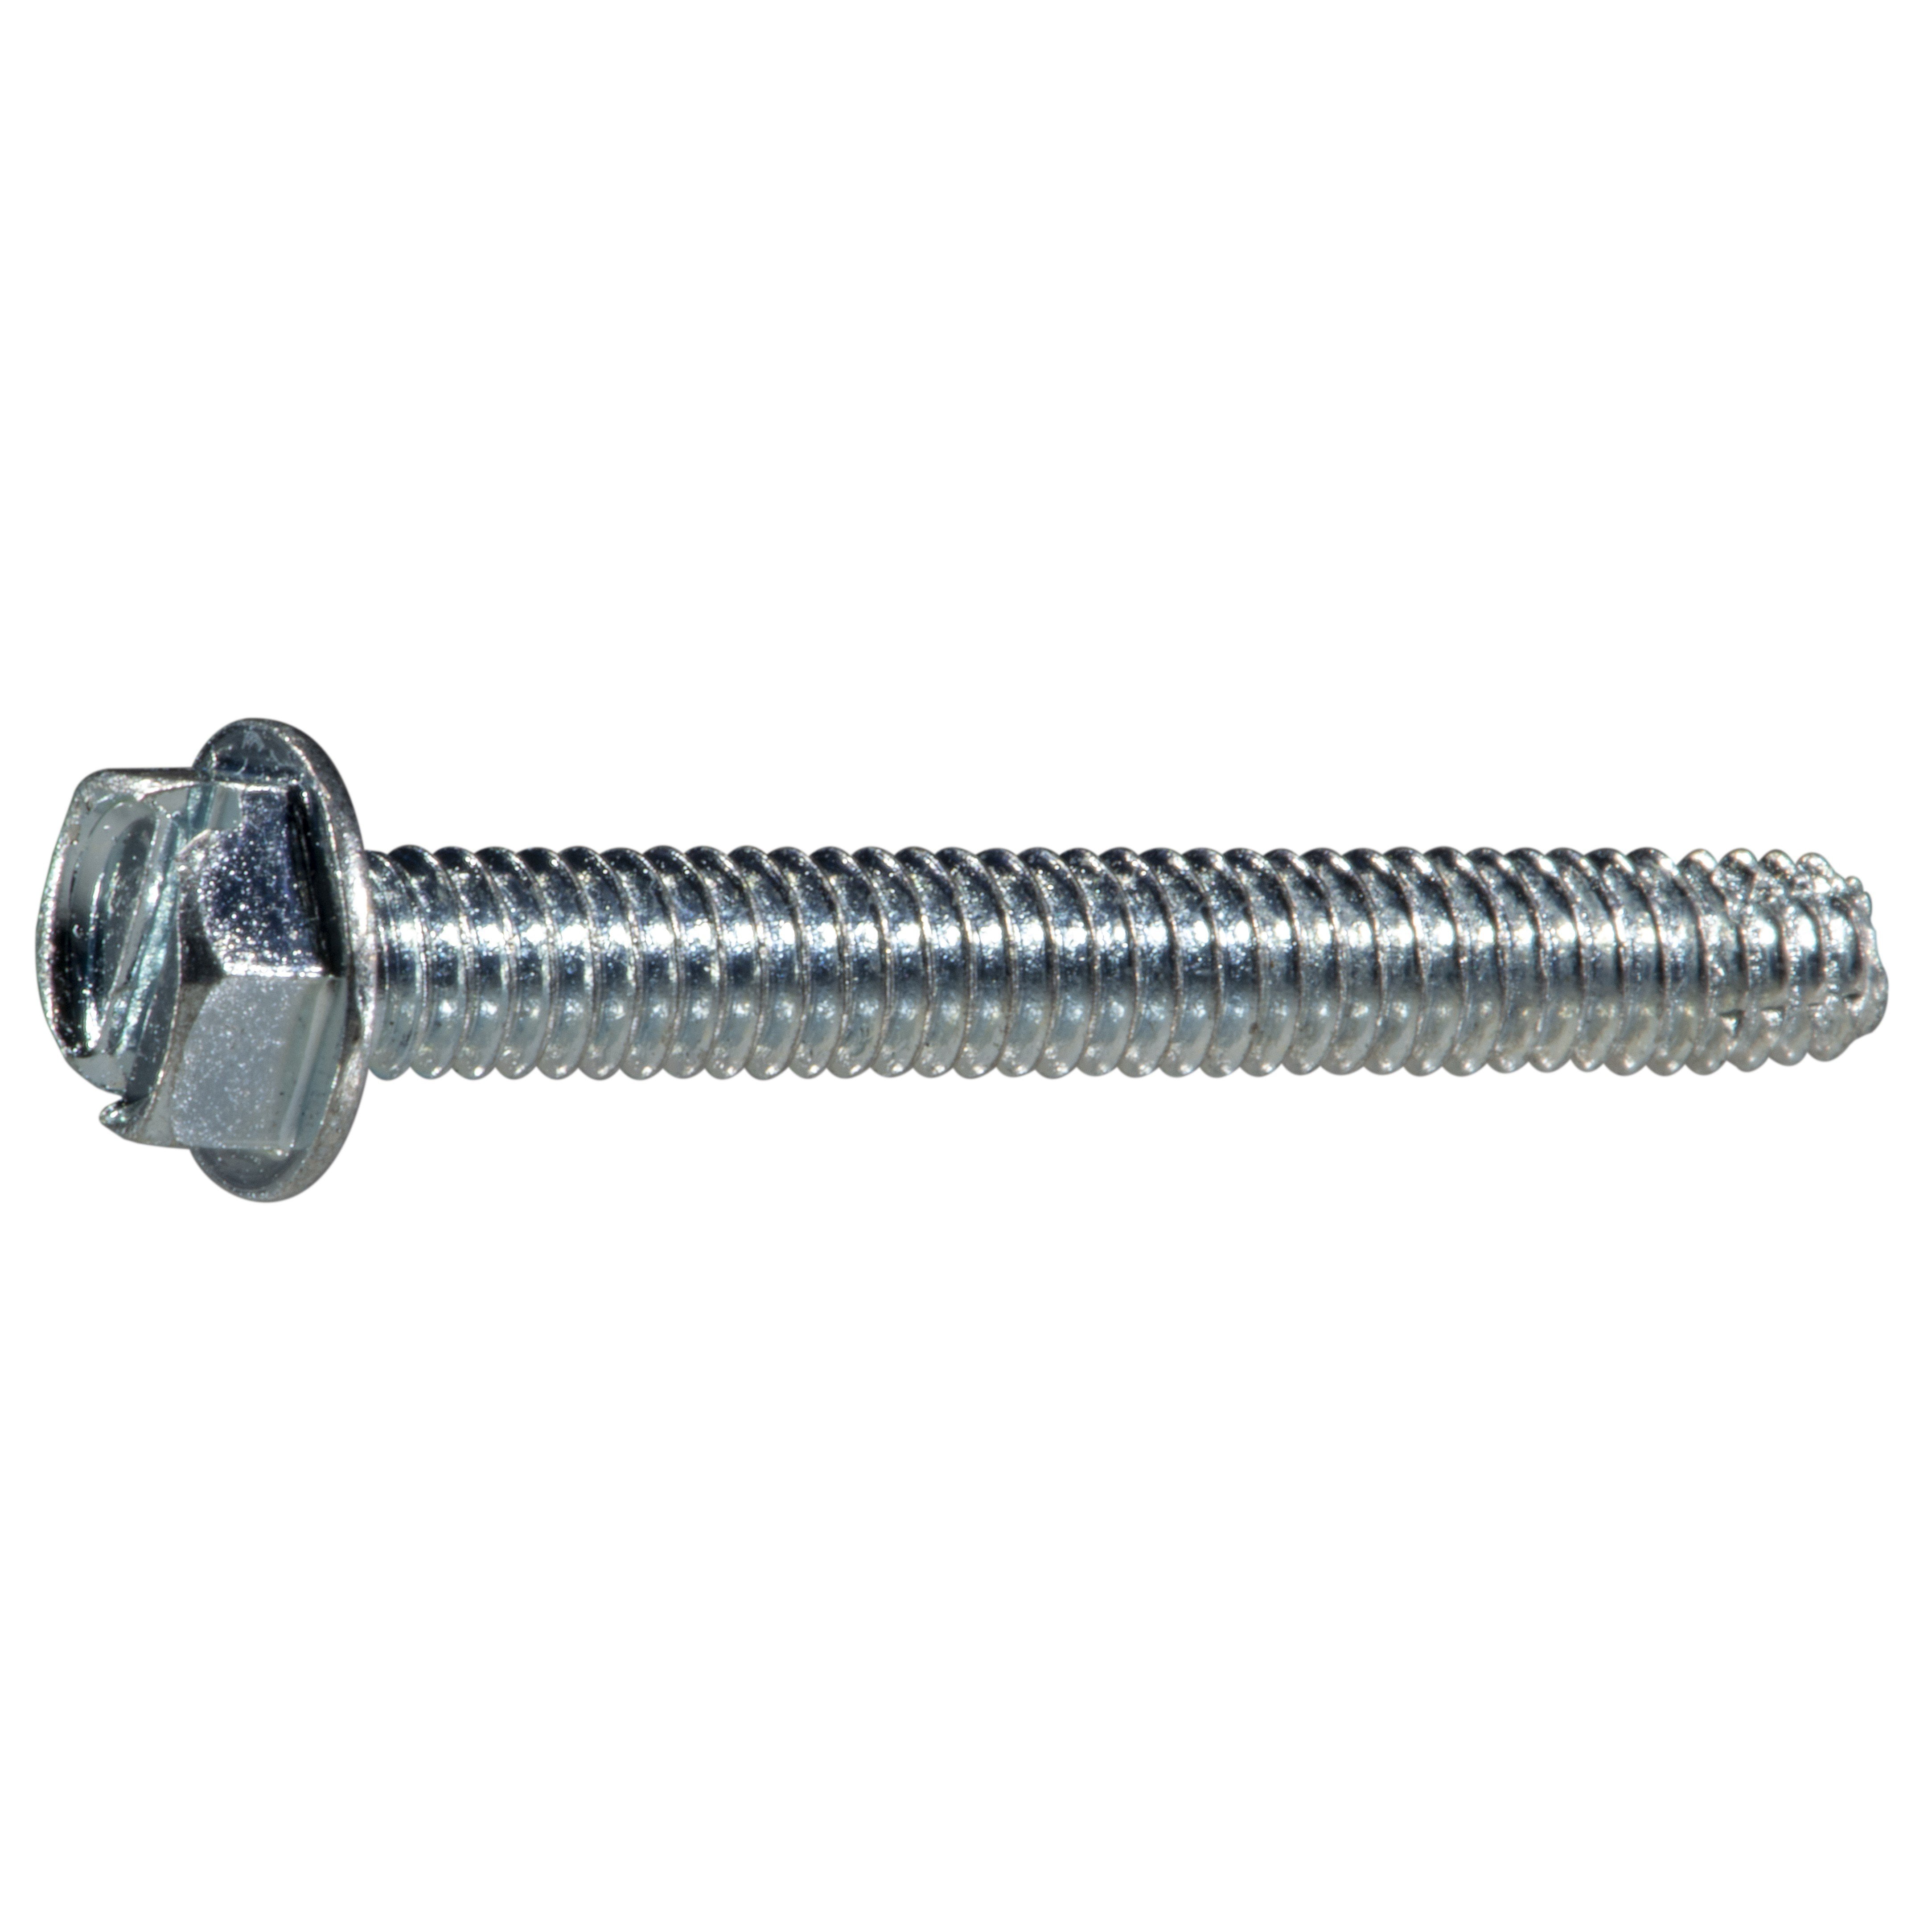 Zinc Plated Finish Hex Washer Head Pack of 10 1-1/2 Length Steel Thread Cutting Screw Type 23 Slotted Drive 5/16-18 Thread Size